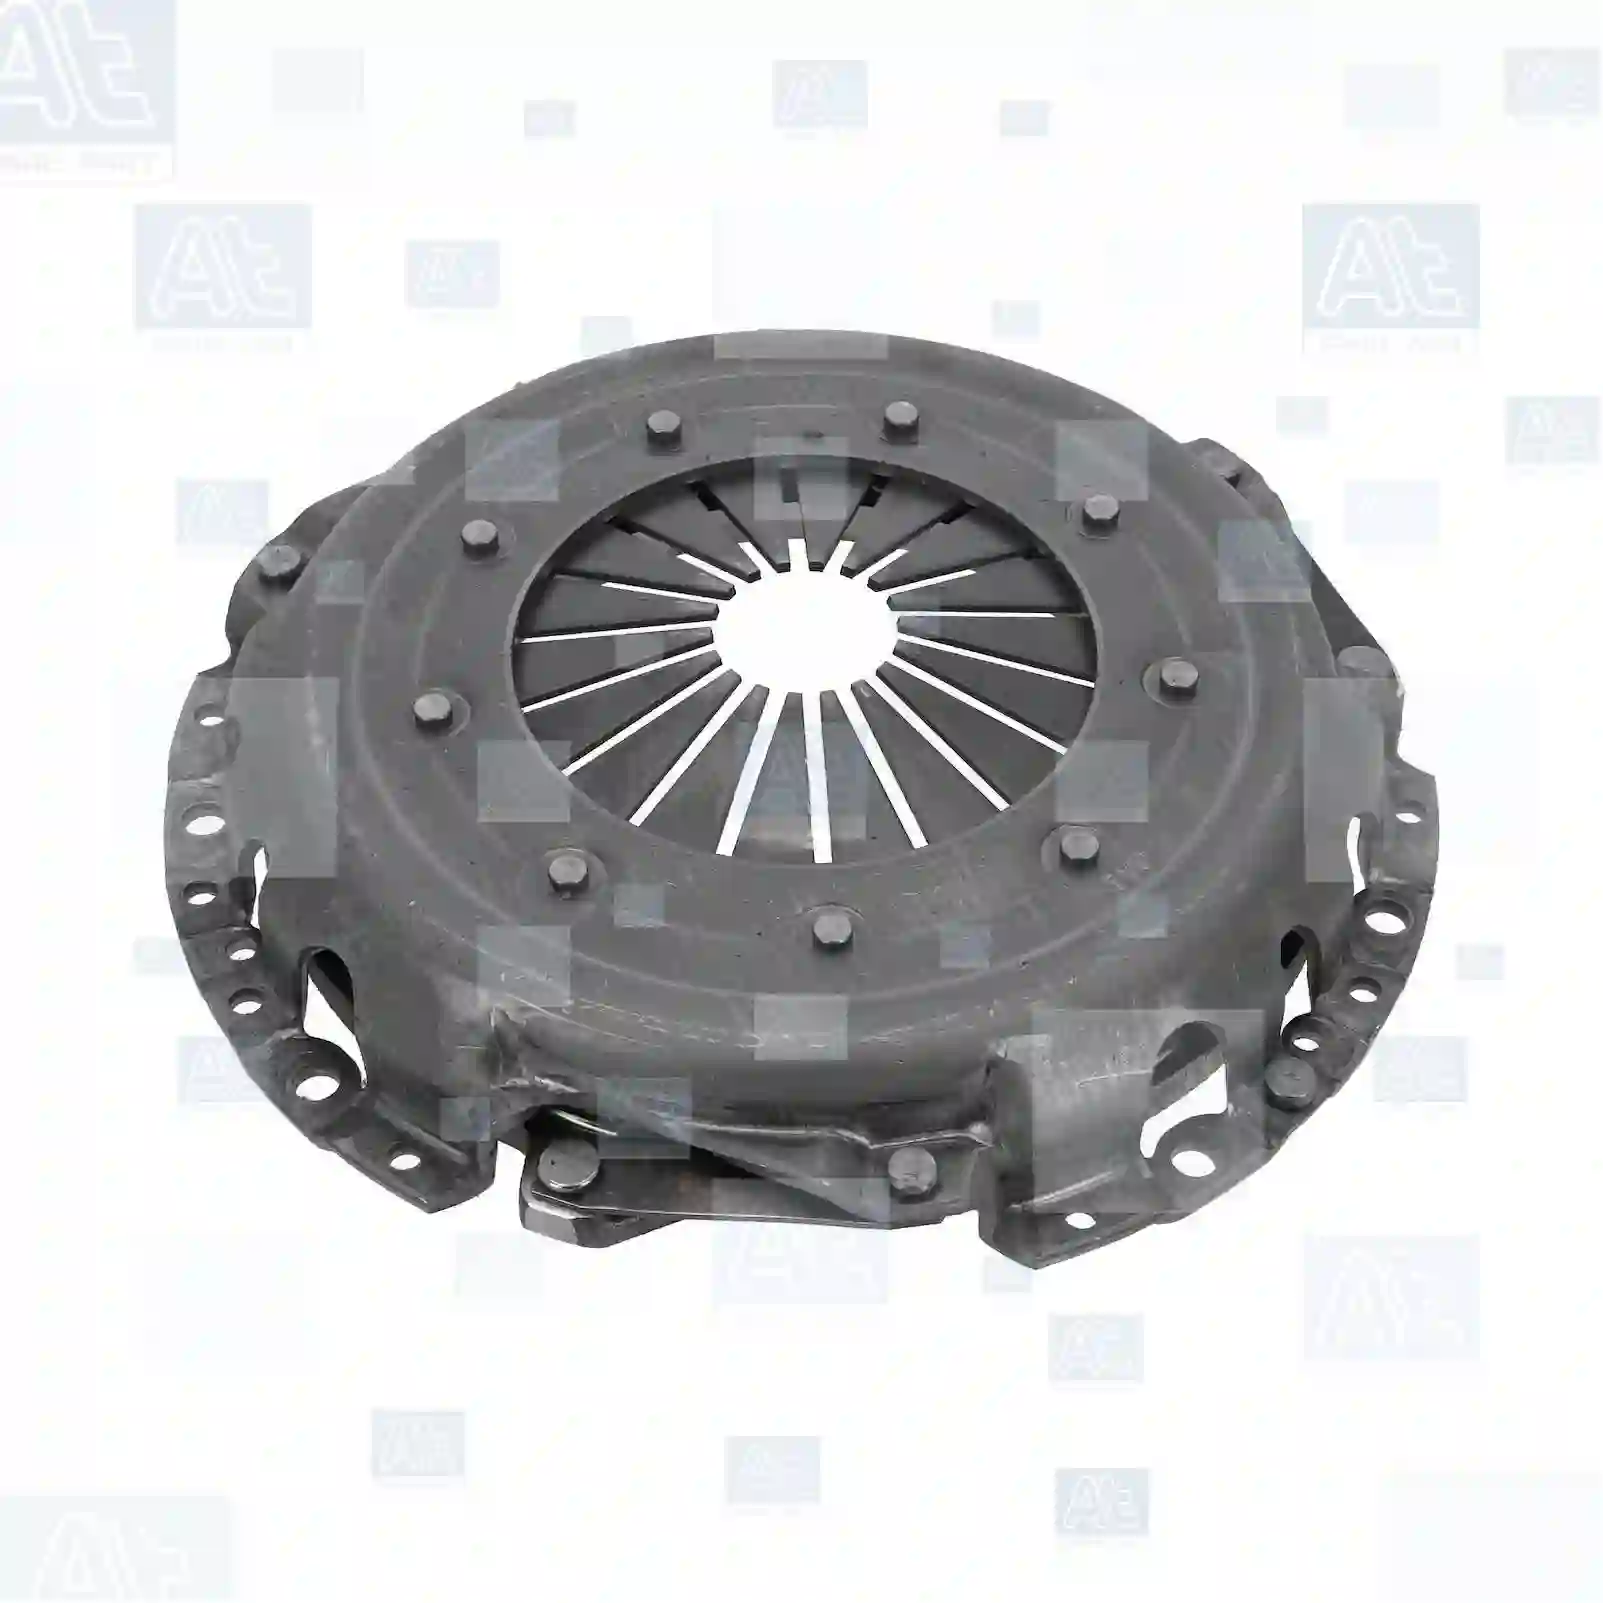 Clutch cover, 77722809, 07651774, 164101203104, 60510328, 60558024, 200485, 05881941, 05882184, 05882262, 05882380, 05888110, 05888745, 05890407, 05984404, 07547183, 07547184, 07662674, 07676856, 07689036, 5984404, 7547184, 7676856, 9606769880, 96067698, 05984404, 98411705, 05881941, 05882262, 05882380, 05888733, 05984404, 05984902, 07547182, 07547183, 07547184, 07651774, 60510328, 200485 ||  77722809 At Spare Part | Engine, Accelerator Pedal, Camshaft, Connecting Rod, Crankcase, Crankshaft, Cylinder Head, Engine Suspension Mountings, Exhaust Manifold, Exhaust Gas Recirculation, Filter Kits, Flywheel Housing, General Overhaul Kits, Engine, Intake Manifold, Oil Cleaner, Oil Cooler, Oil Filter, Oil Pump, Oil Sump, Piston & Liner, Sensor & Switch, Timing Case, Turbocharger, Cooling System, Belt Tensioner, Coolant Filter, Coolant Pipe, Corrosion Prevention Agent, Drive, Expansion Tank, Fan, Intercooler, Monitors & Gauges, Radiator, Thermostat, V-Belt / Timing belt, Water Pump, Fuel System, Electronical Injector Unit, Feed Pump, Fuel Filter, cpl., Fuel Gauge Sender,  Fuel Line, Fuel Pump, Fuel Tank, Injection Line Kit, Injection Pump, Exhaust System, Clutch & Pedal, Gearbox, Propeller Shaft, Axles, Brake System, Hubs & Wheels, Suspension, Leaf Spring, Universal Parts / Accessories, Steering, Electrical System, Cabin Clutch cover, 77722809, 07651774, 164101203104, 60510328, 60558024, 200485, 05881941, 05882184, 05882262, 05882380, 05888110, 05888745, 05890407, 05984404, 07547183, 07547184, 07662674, 07676856, 07689036, 5984404, 7547184, 7676856, 9606769880, 96067698, 05984404, 98411705, 05881941, 05882262, 05882380, 05888733, 05984404, 05984902, 07547182, 07547183, 07547184, 07651774, 60510328, 200485 ||  77722809 At Spare Part | Engine, Accelerator Pedal, Camshaft, Connecting Rod, Crankcase, Crankshaft, Cylinder Head, Engine Suspension Mountings, Exhaust Manifold, Exhaust Gas Recirculation, Filter Kits, Flywheel Housing, General Overhaul Kits, Engine, Intake Manifold, Oil Cleaner, Oil Cooler, Oil Filter, Oil Pump, Oil Sump, Piston & Liner, Sensor & Switch, Timing Case, Turbocharger, Cooling System, Belt Tensioner, Coolant Filter, Coolant Pipe, Corrosion Prevention Agent, Drive, Expansion Tank, Fan, Intercooler, Monitors & Gauges, Radiator, Thermostat, V-Belt / Timing belt, Water Pump, Fuel System, Electronical Injector Unit, Feed Pump, Fuel Filter, cpl., Fuel Gauge Sender,  Fuel Line, Fuel Pump, Fuel Tank, Injection Line Kit, Injection Pump, Exhaust System, Clutch & Pedal, Gearbox, Propeller Shaft, Axles, Brake System, Hubs & Wheels, Suspension, Leaf Spring, Universal Parts / Accessories, Steering, Electrical System, Cabin